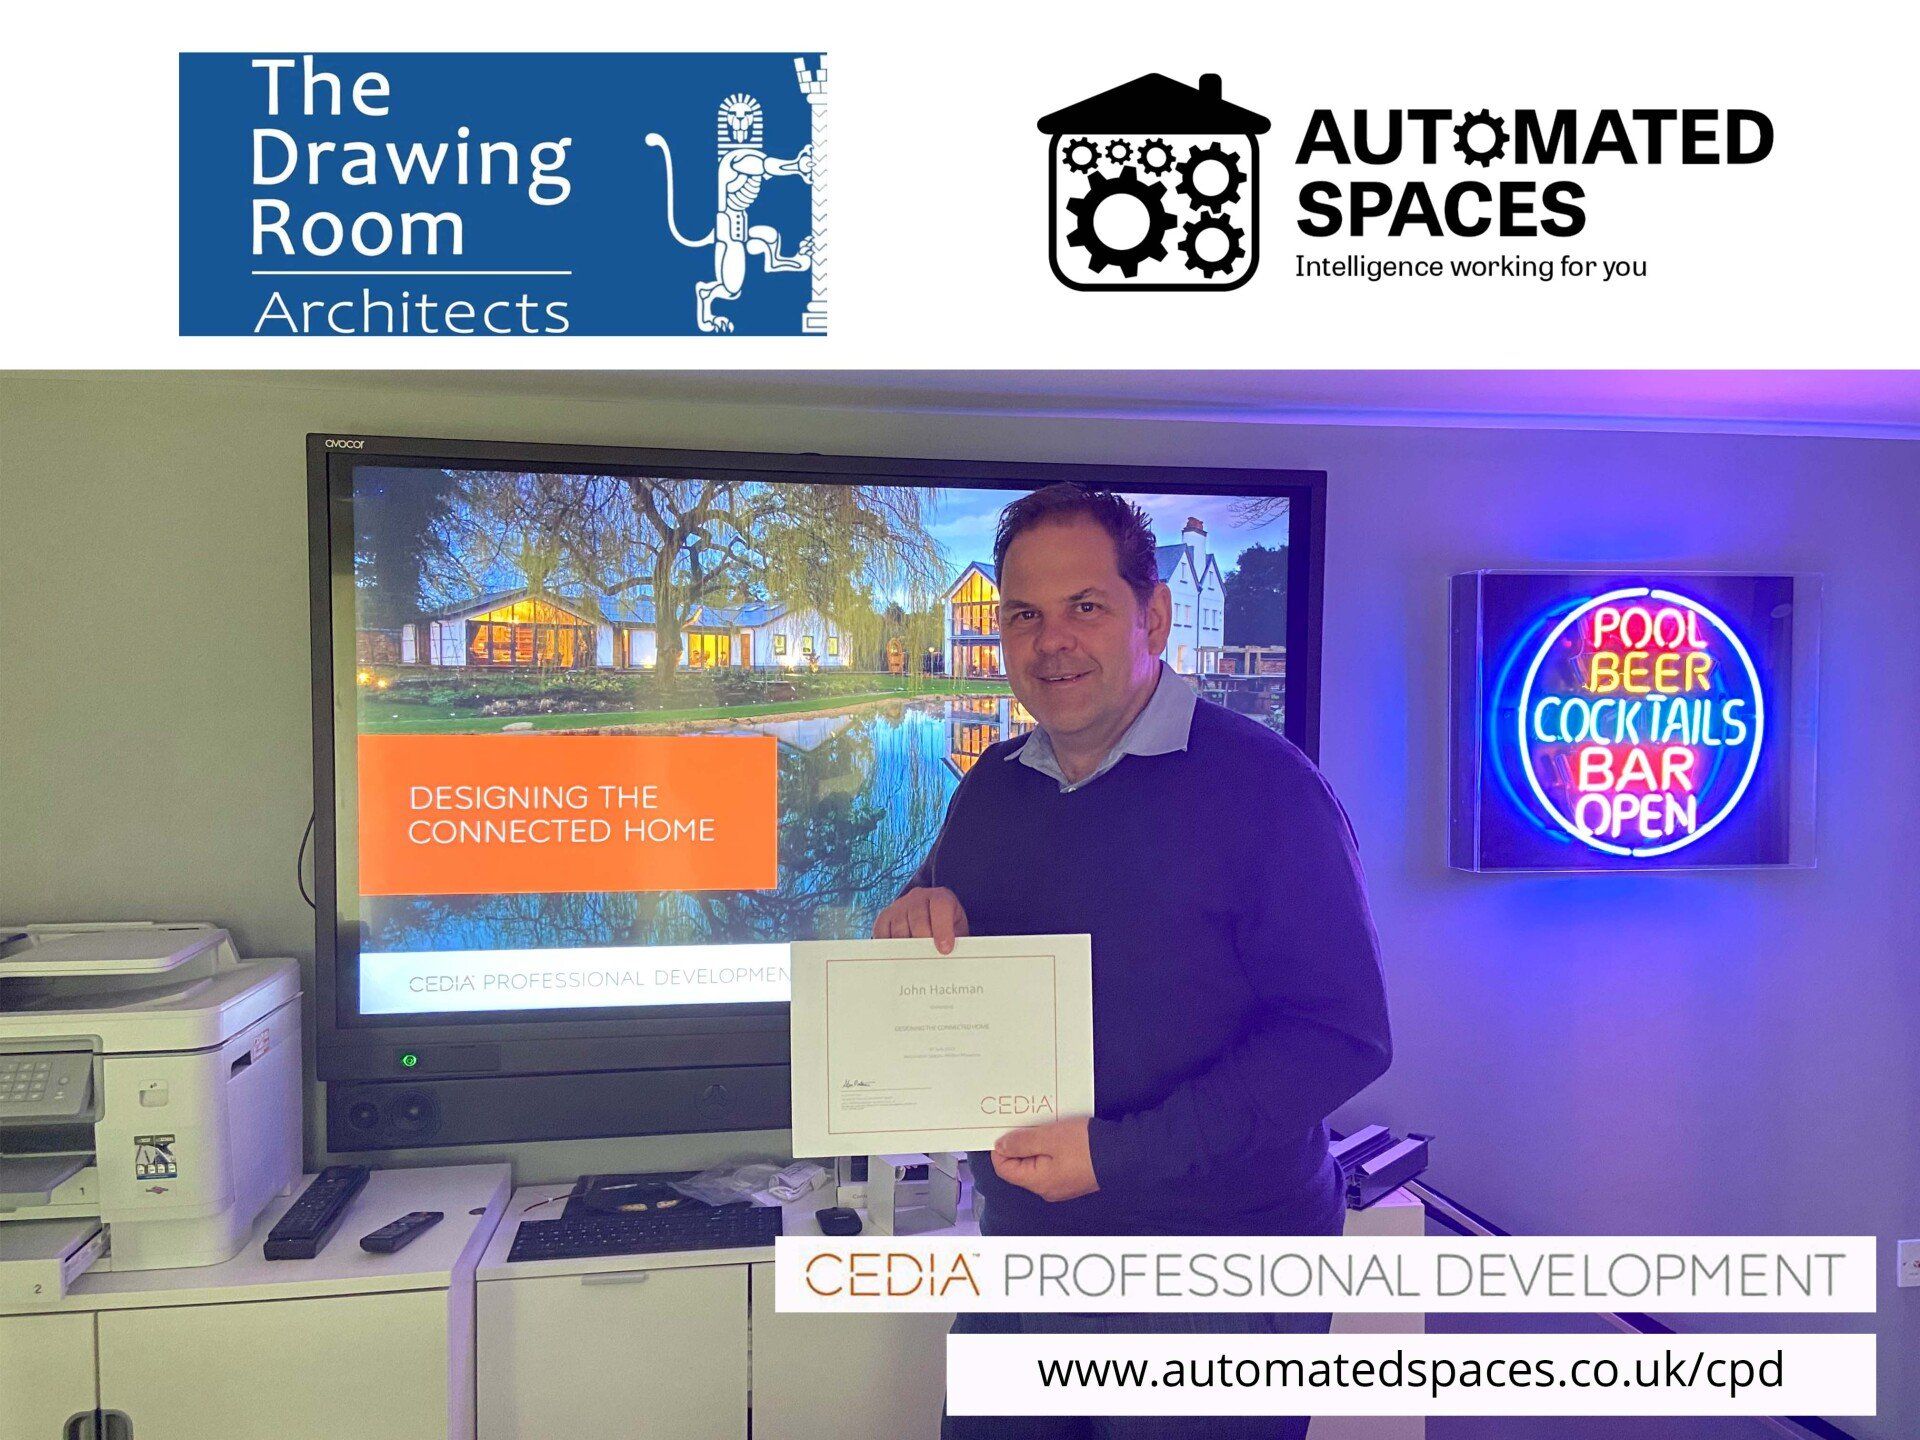 Photograph of The Drawing Room (Architects) Architect John Hackman attending a CPD at Automated Spaces